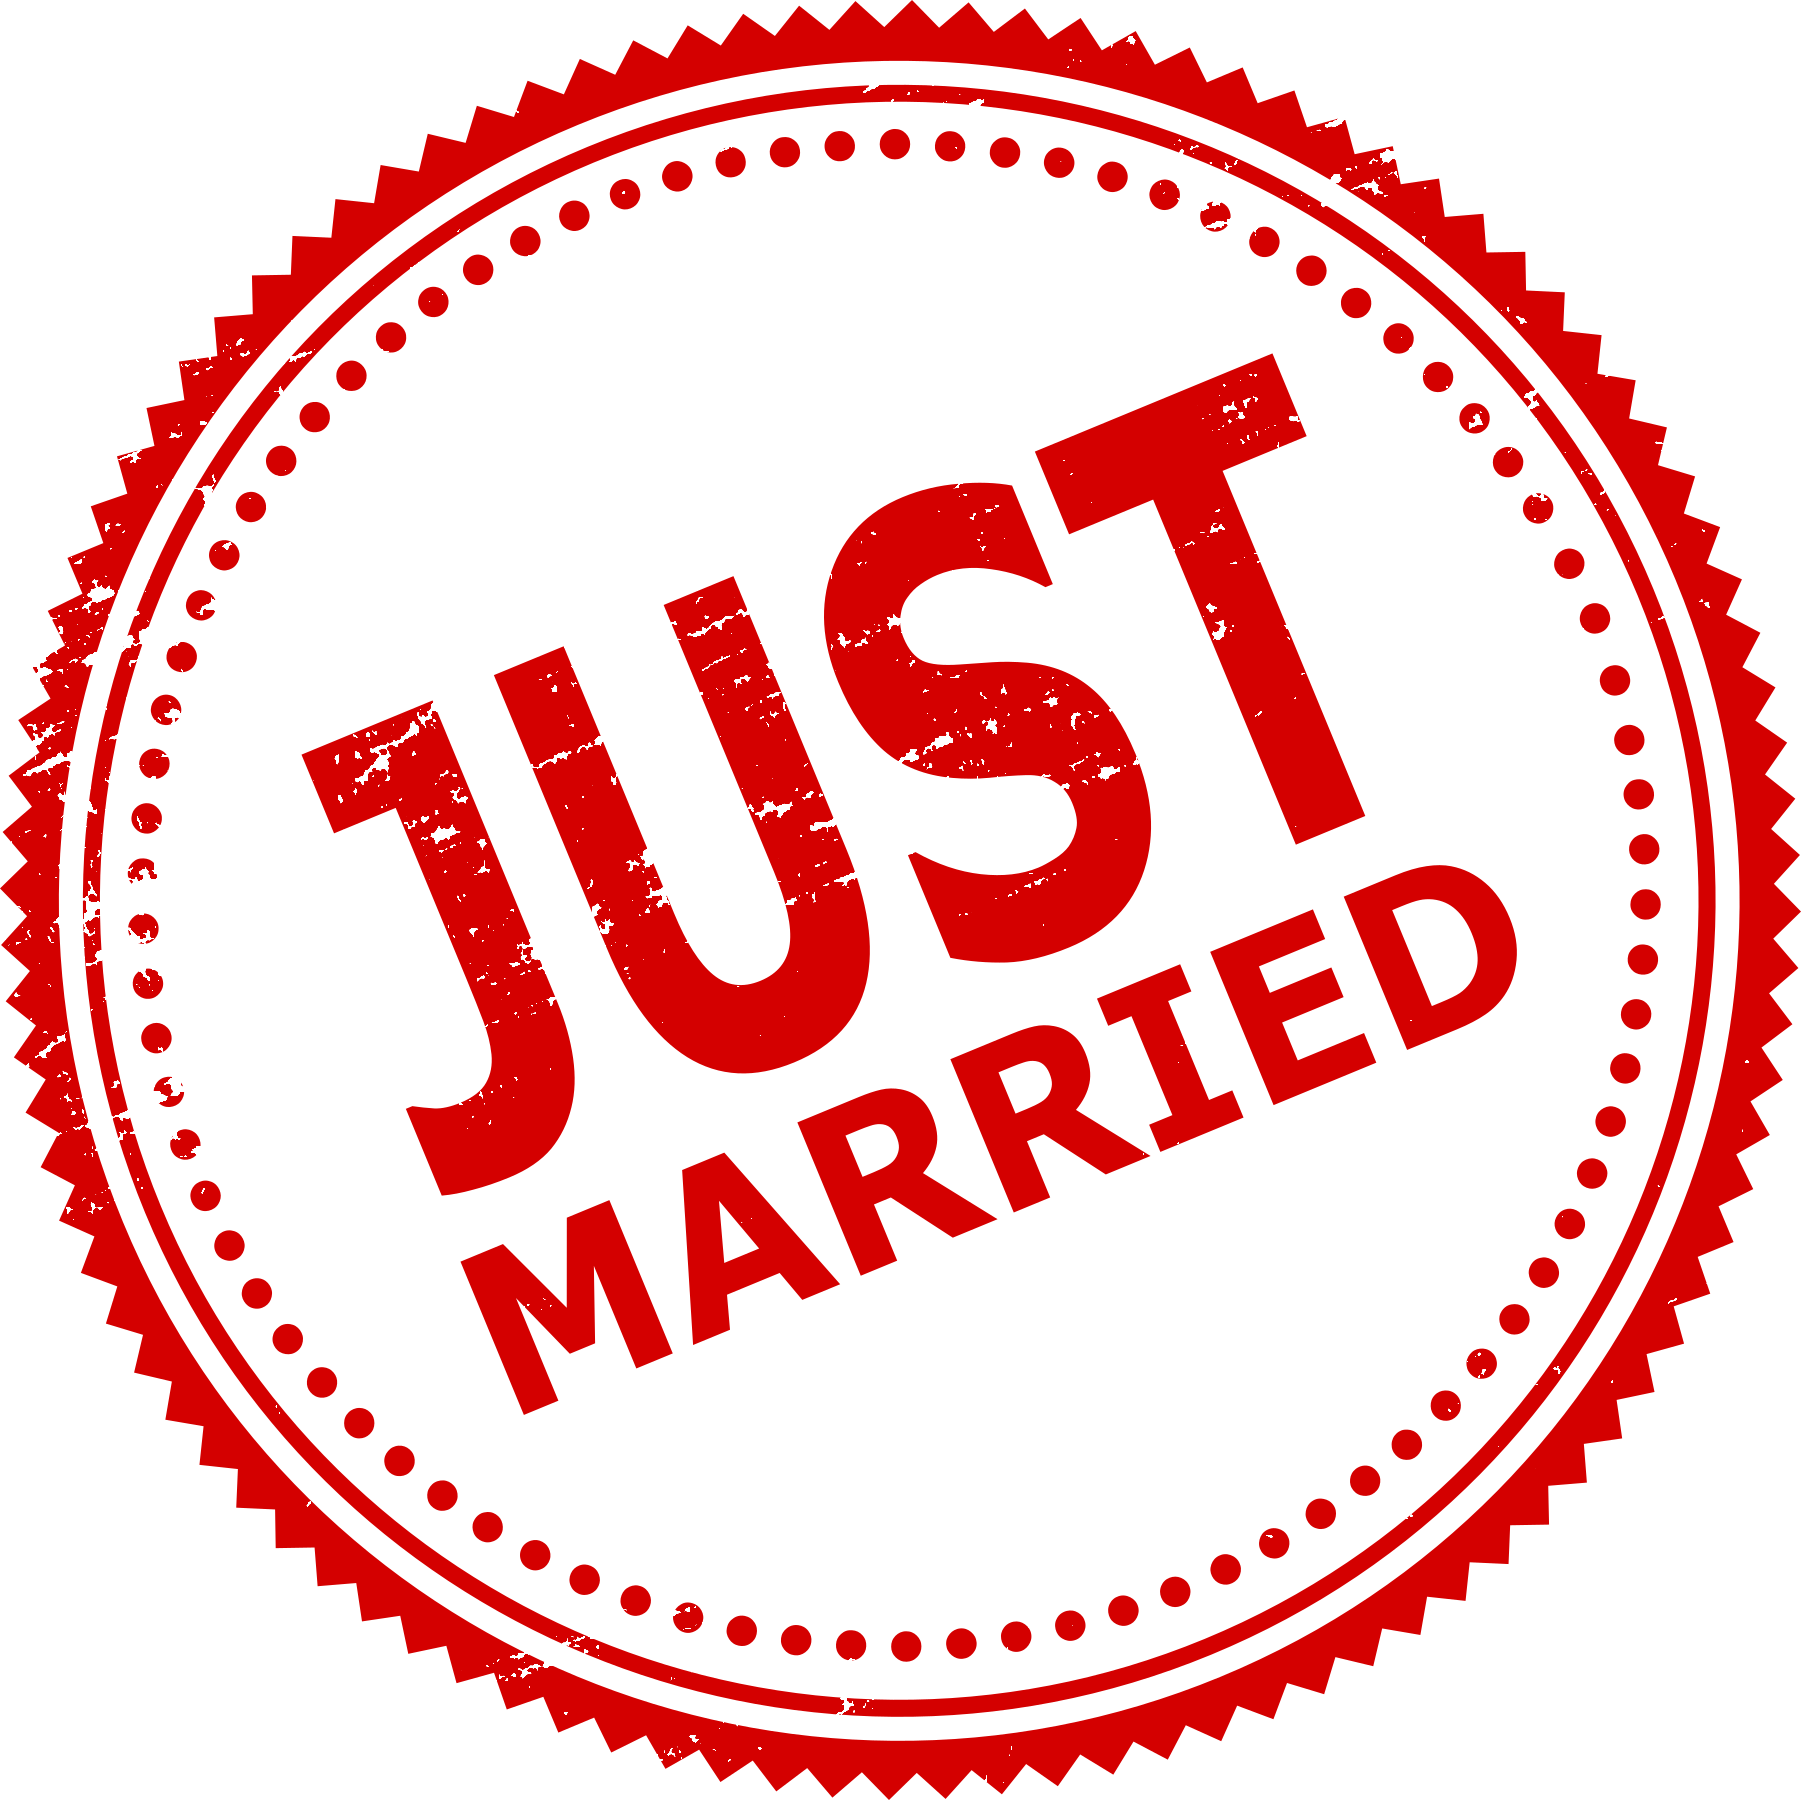 Just Married Stamp Graphic